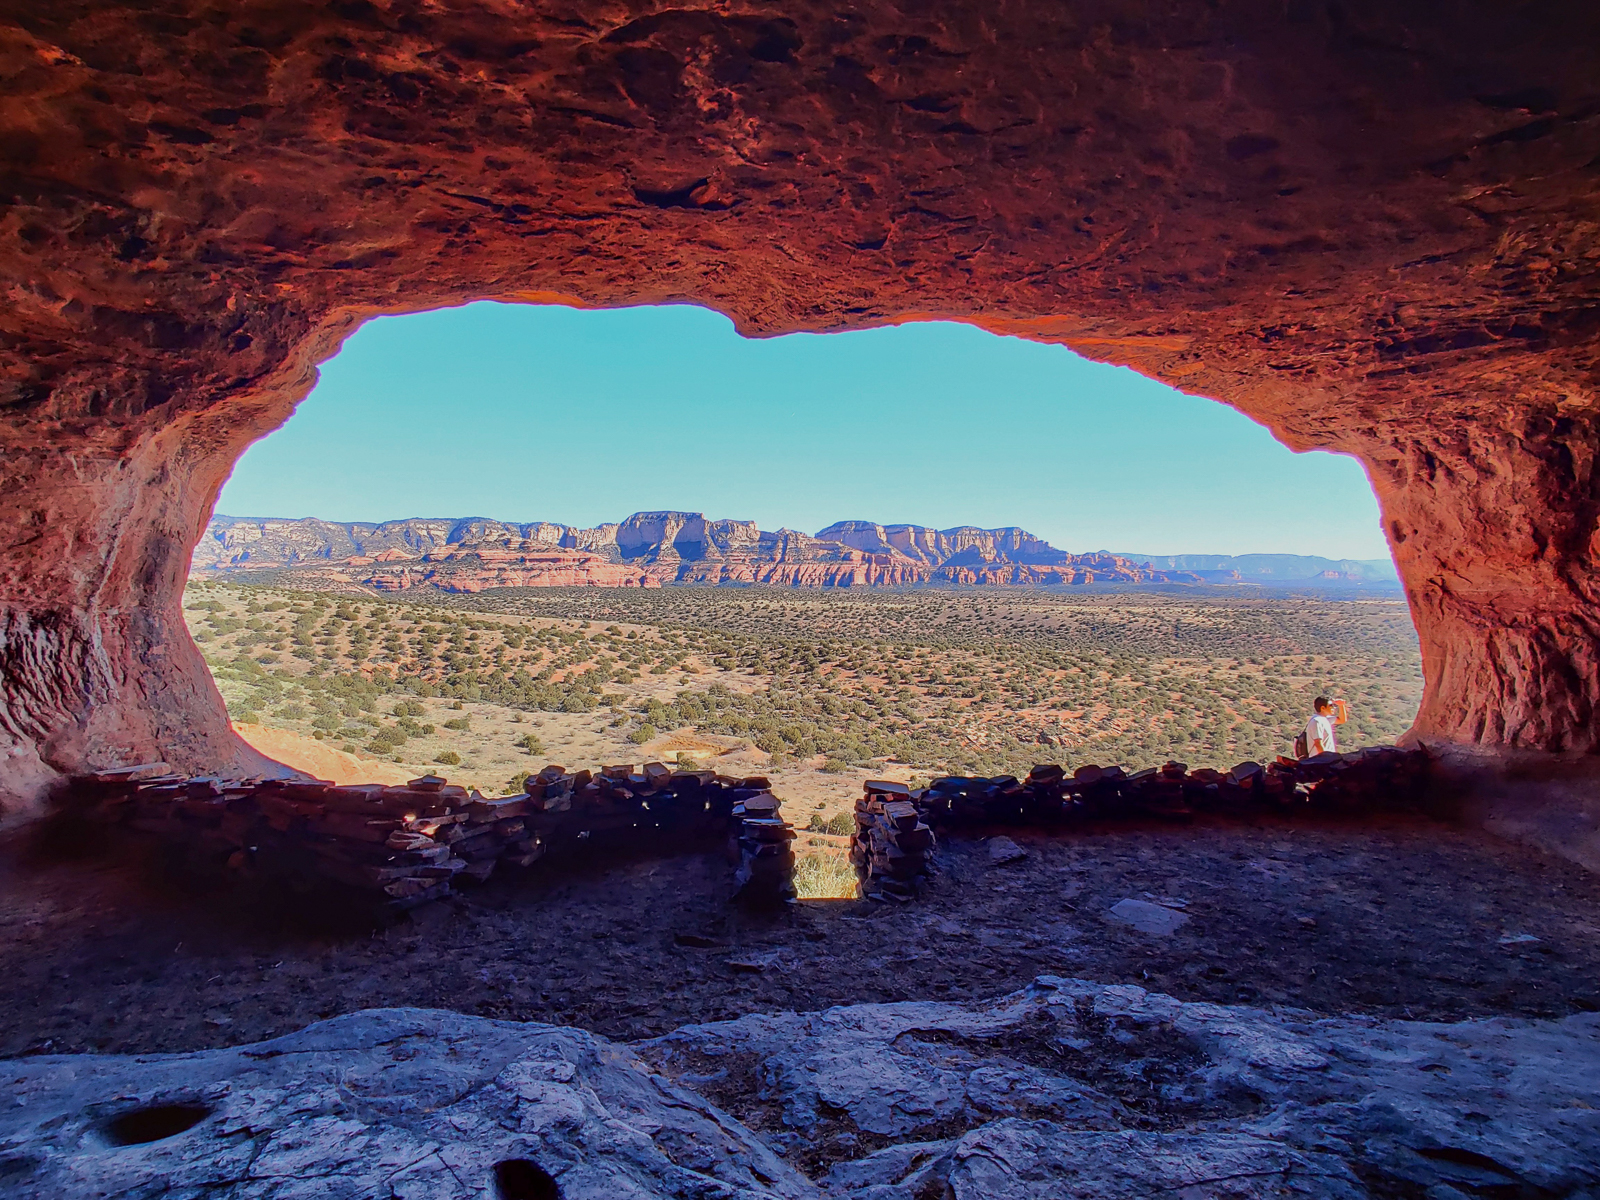 6 Iconic & Secret Sedona Vortex Hikes For All Levels shamans cave robbers roost